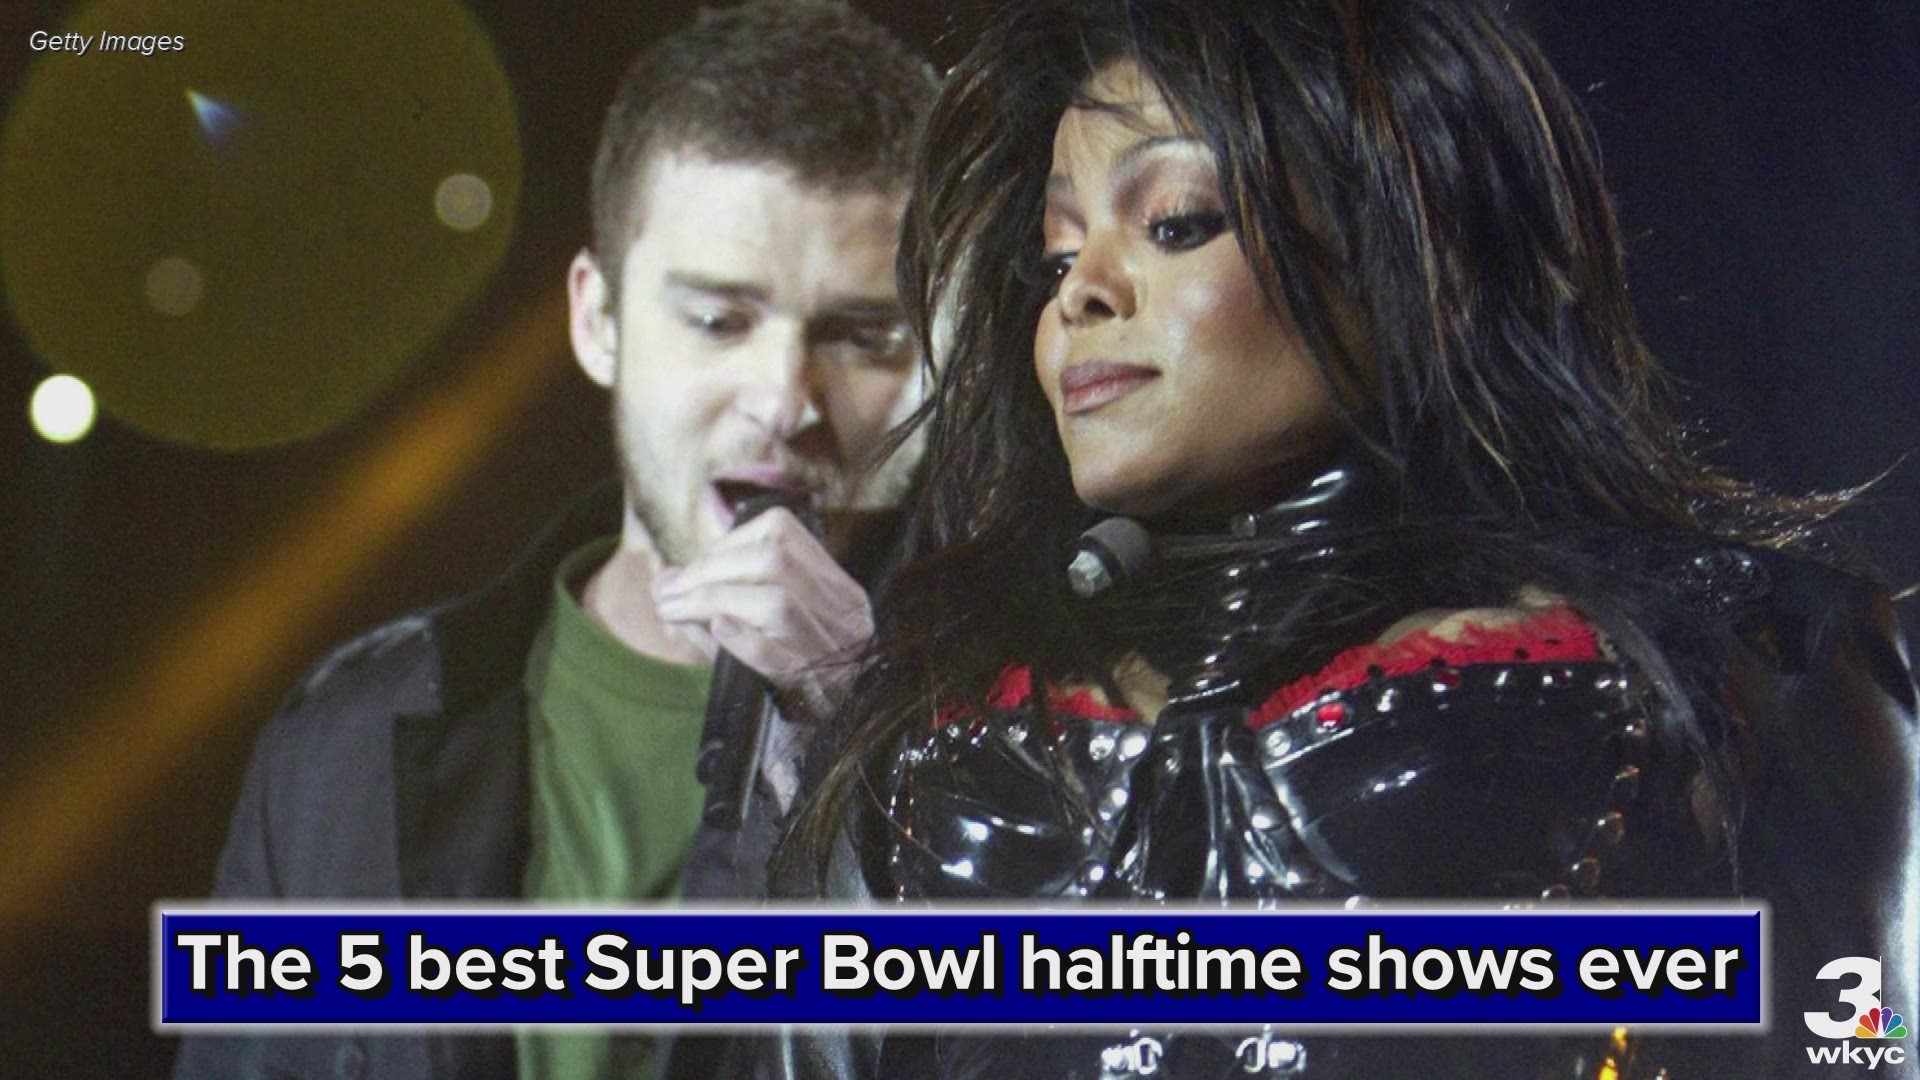 As Maroon 5 prepares to take center stage, we take a look at some of the Super Bowl's most memorable halftime shows.